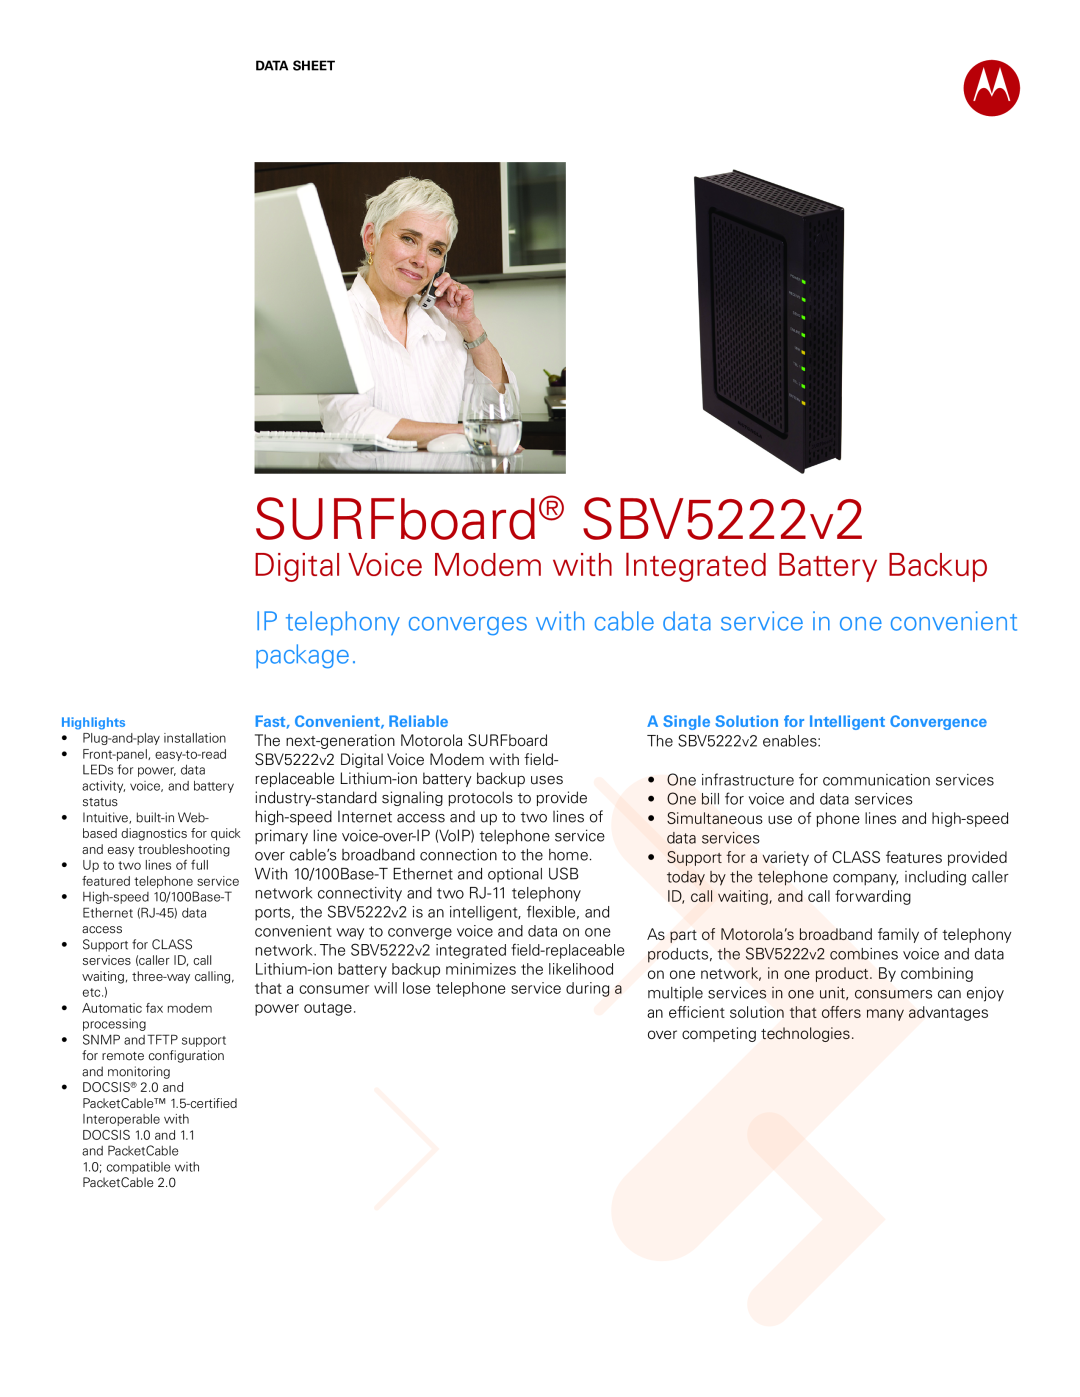 Motorola manual SURFboard SBV5222v2, Fast, Convenient, Reliable, A Single Solution for Intelligent Convergence 